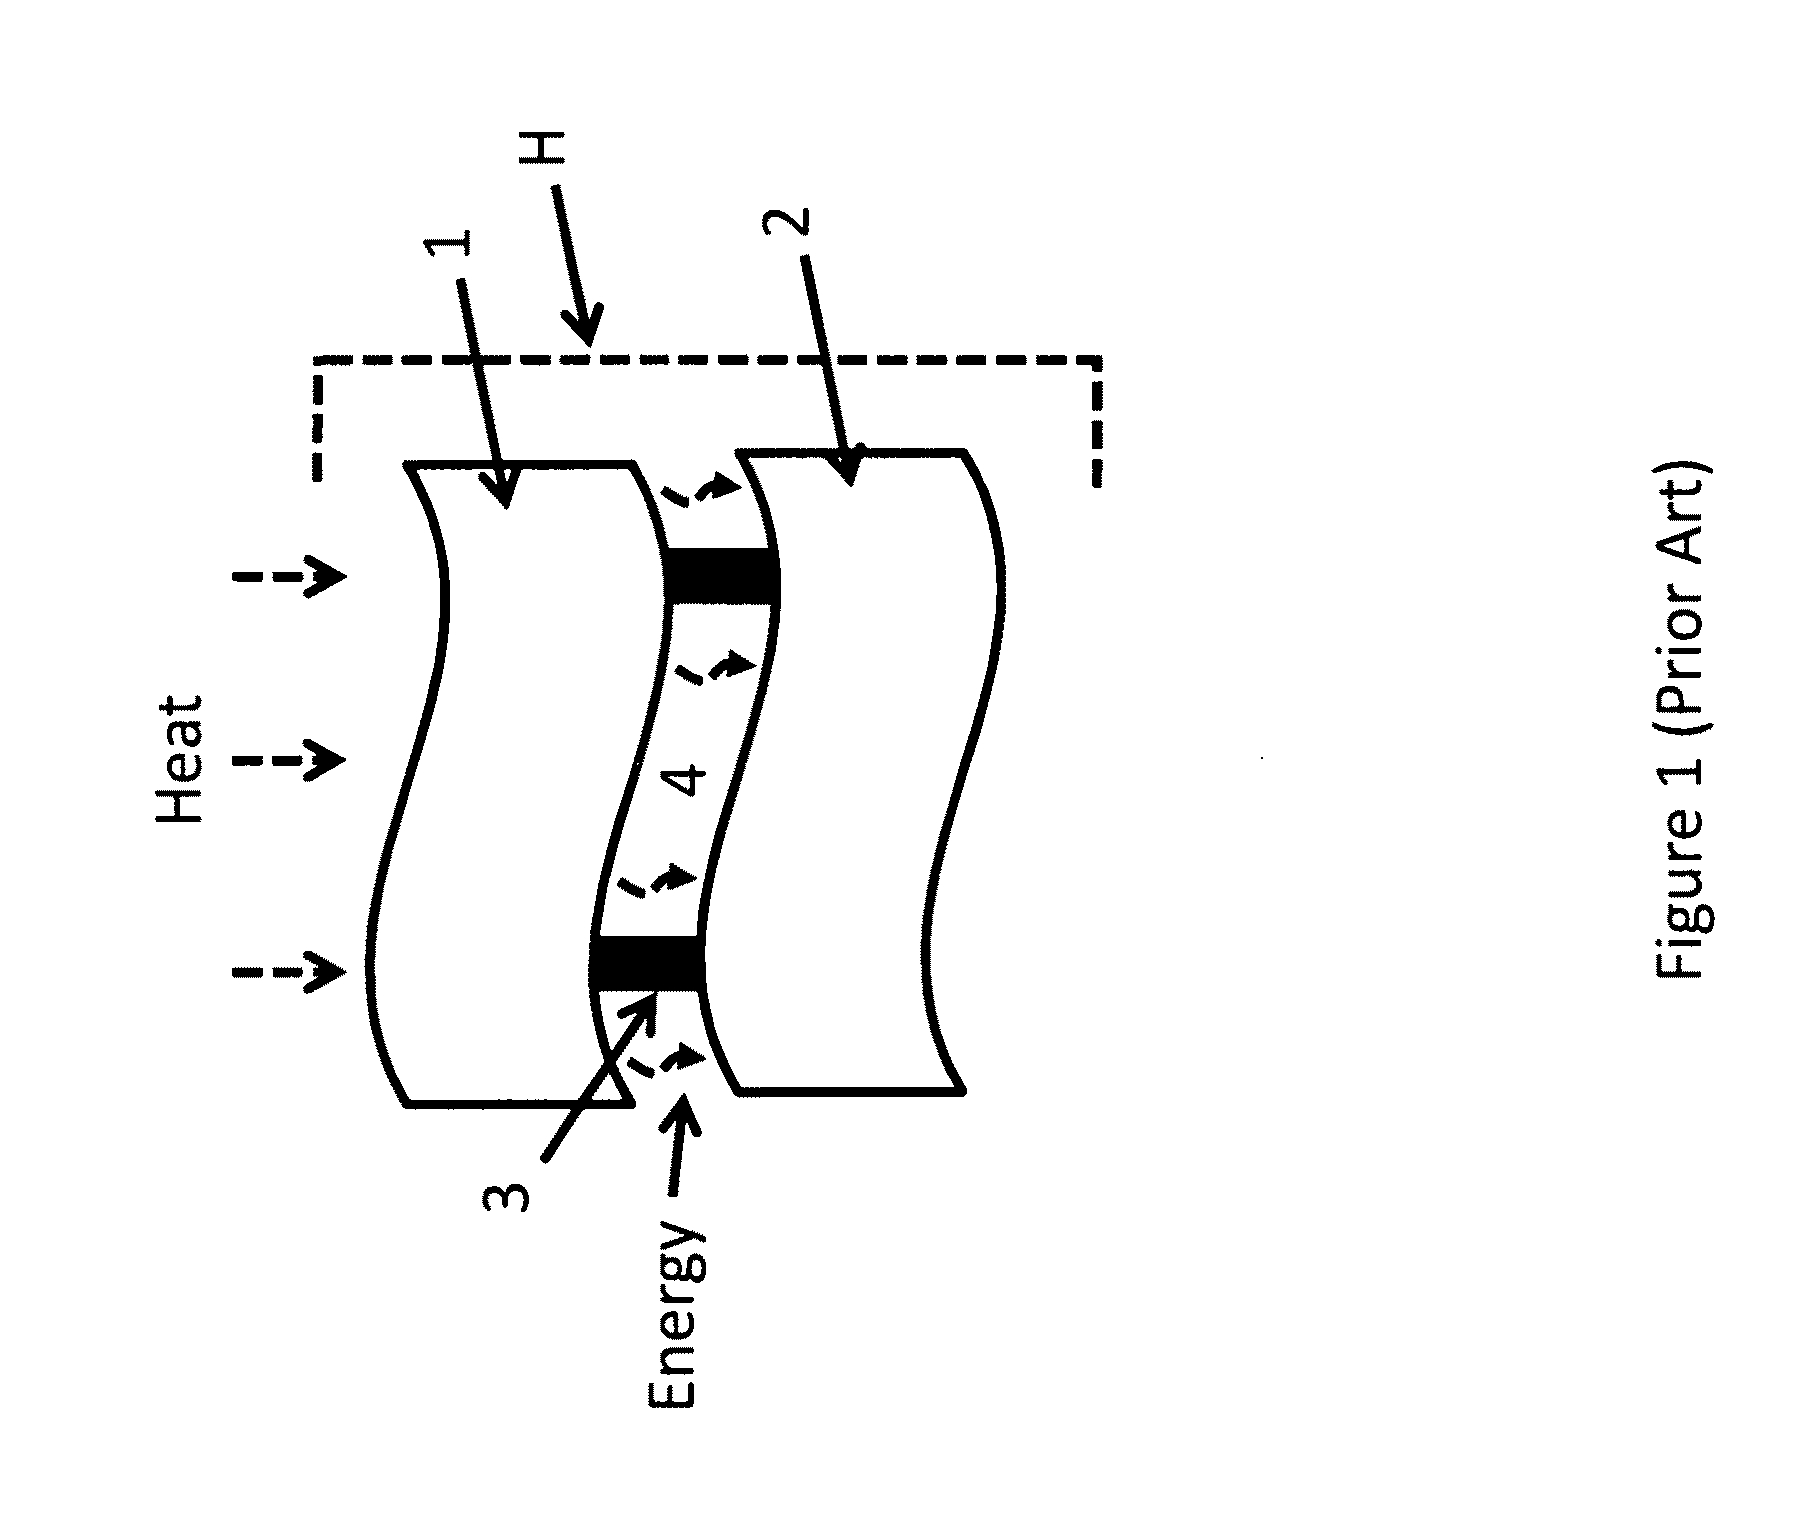 Method and structure, using flexible membrane surfaces, for setting and/or maintaining a uniform micron/sub-micron gap separation between juxtaposed photosensitive and heat-supplying surfaces of photovoltaic chips and the like for the generation of electrical power